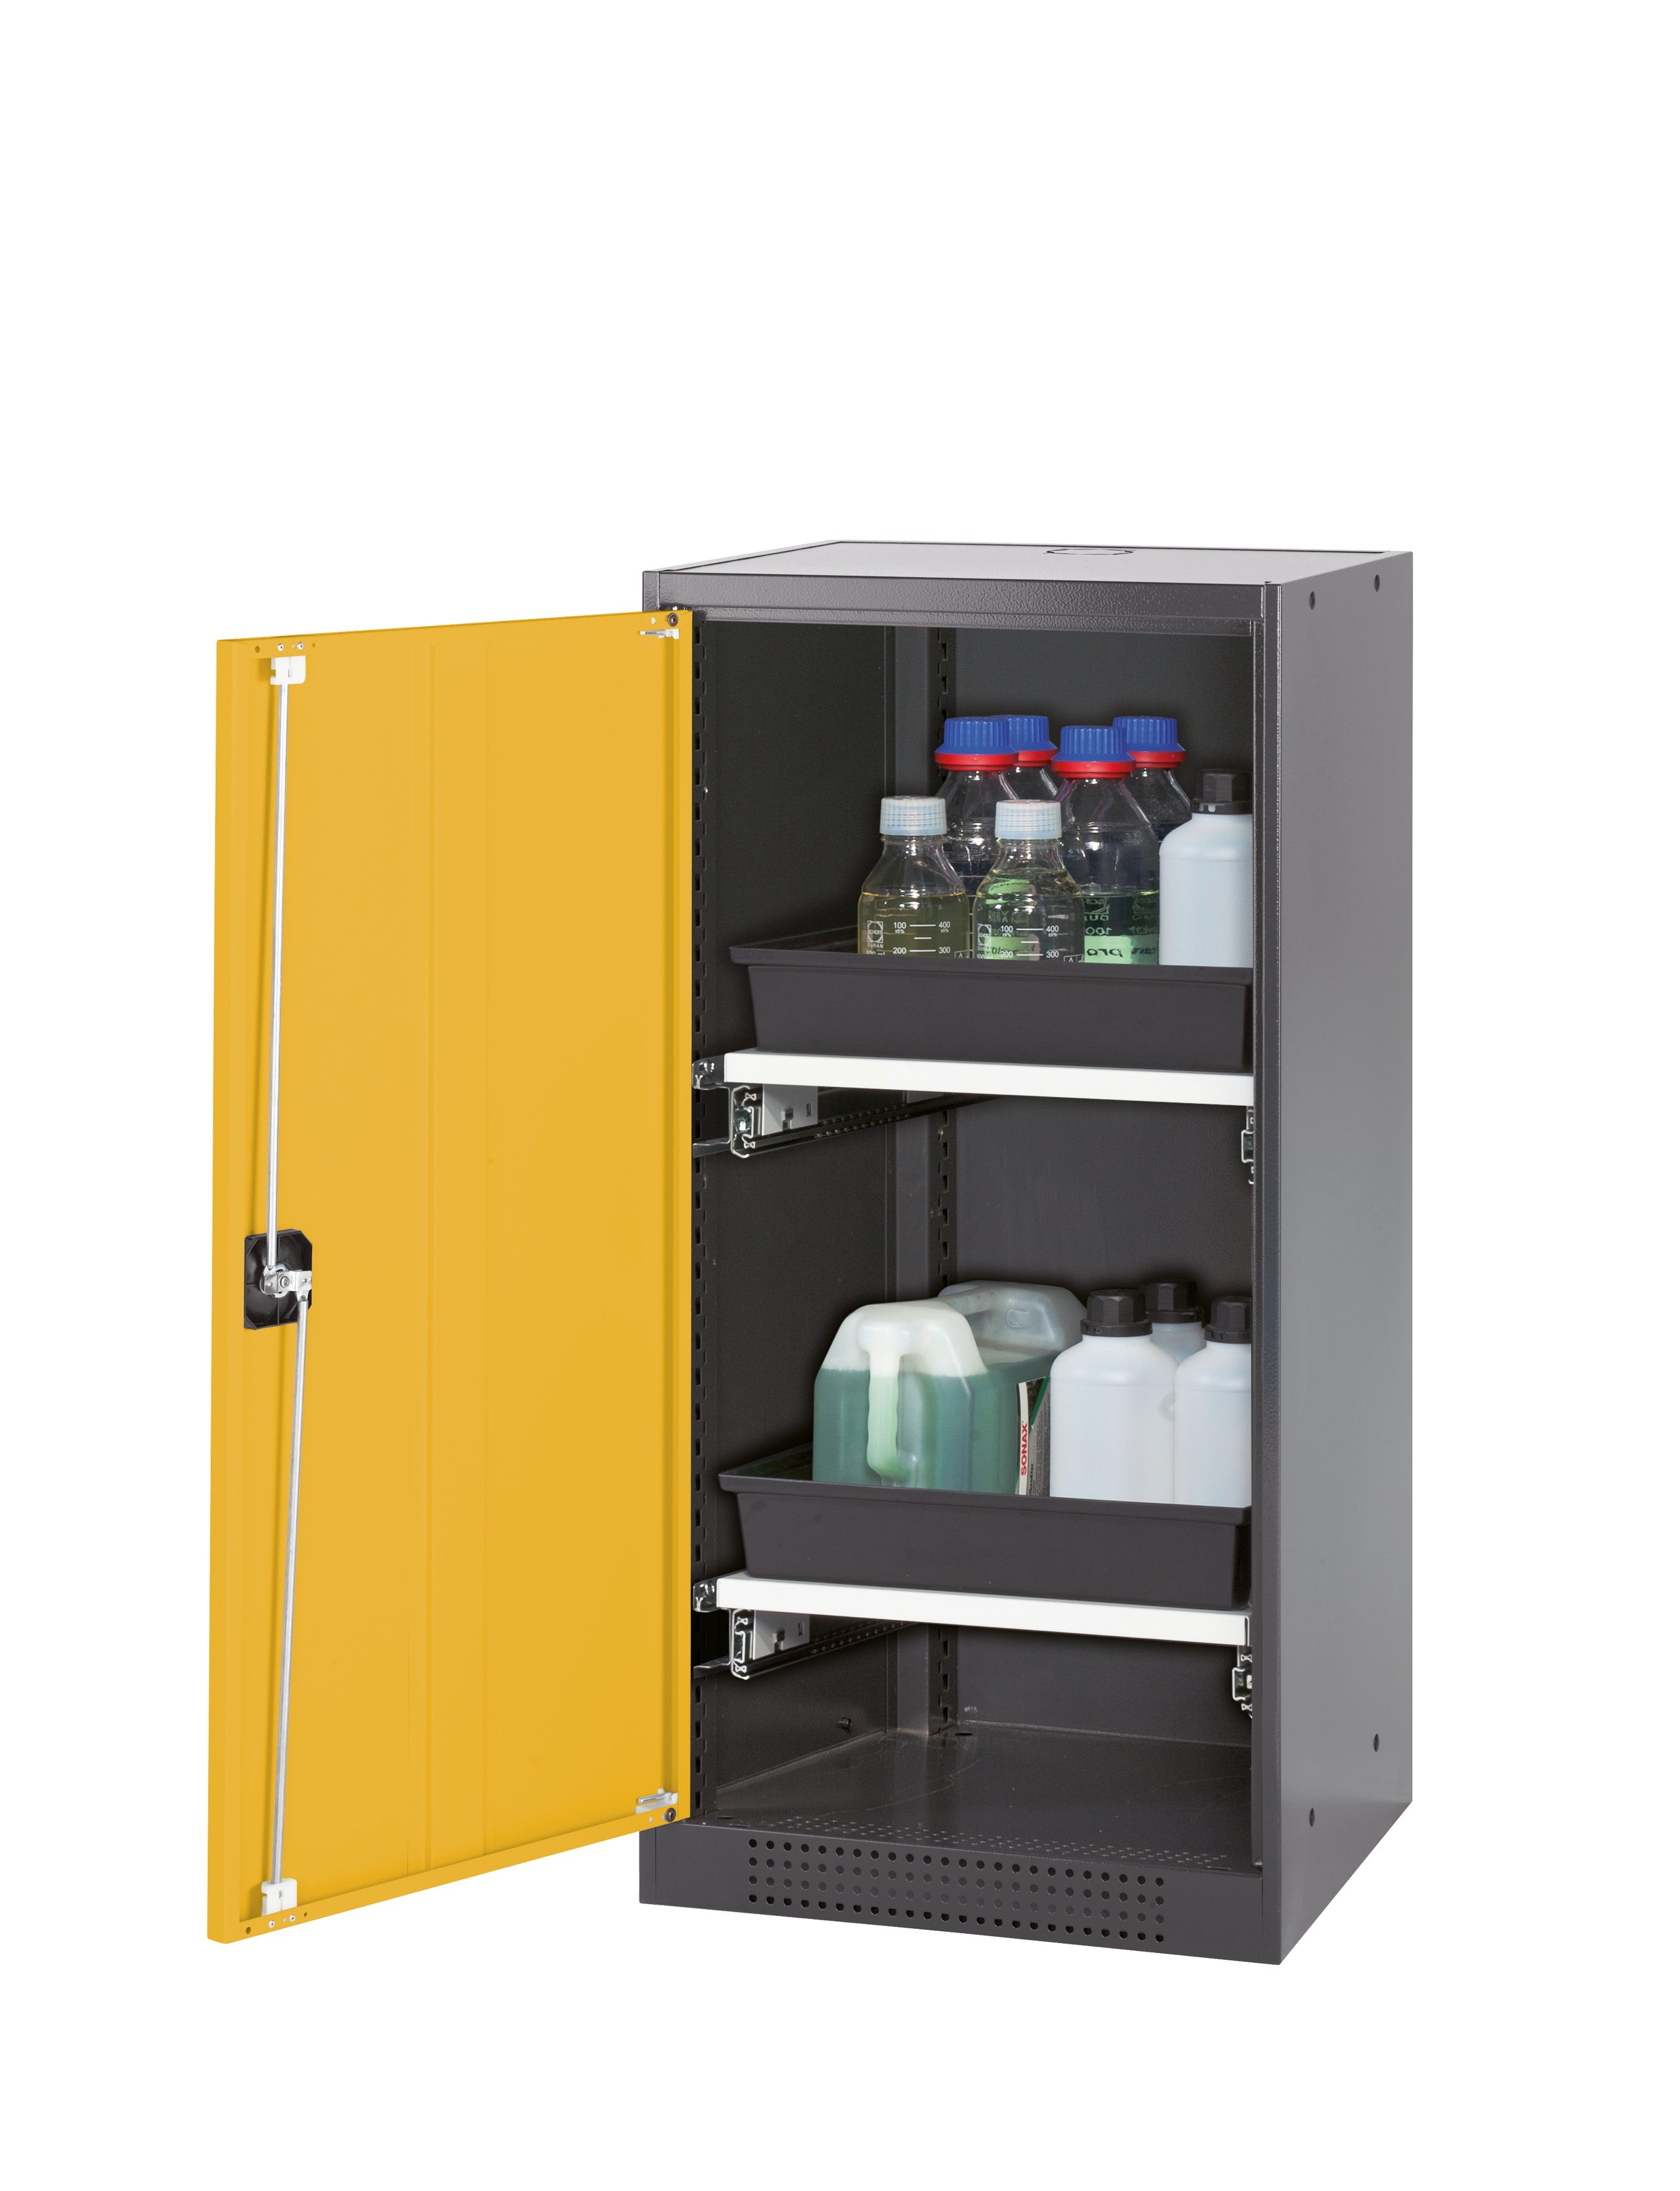 Chemical cabinet CS-CLASSIC model CS.110.054 in safety yellow RAL 1004 with 2x AbZ pull-out shelves (sheet steel/polypropylene)